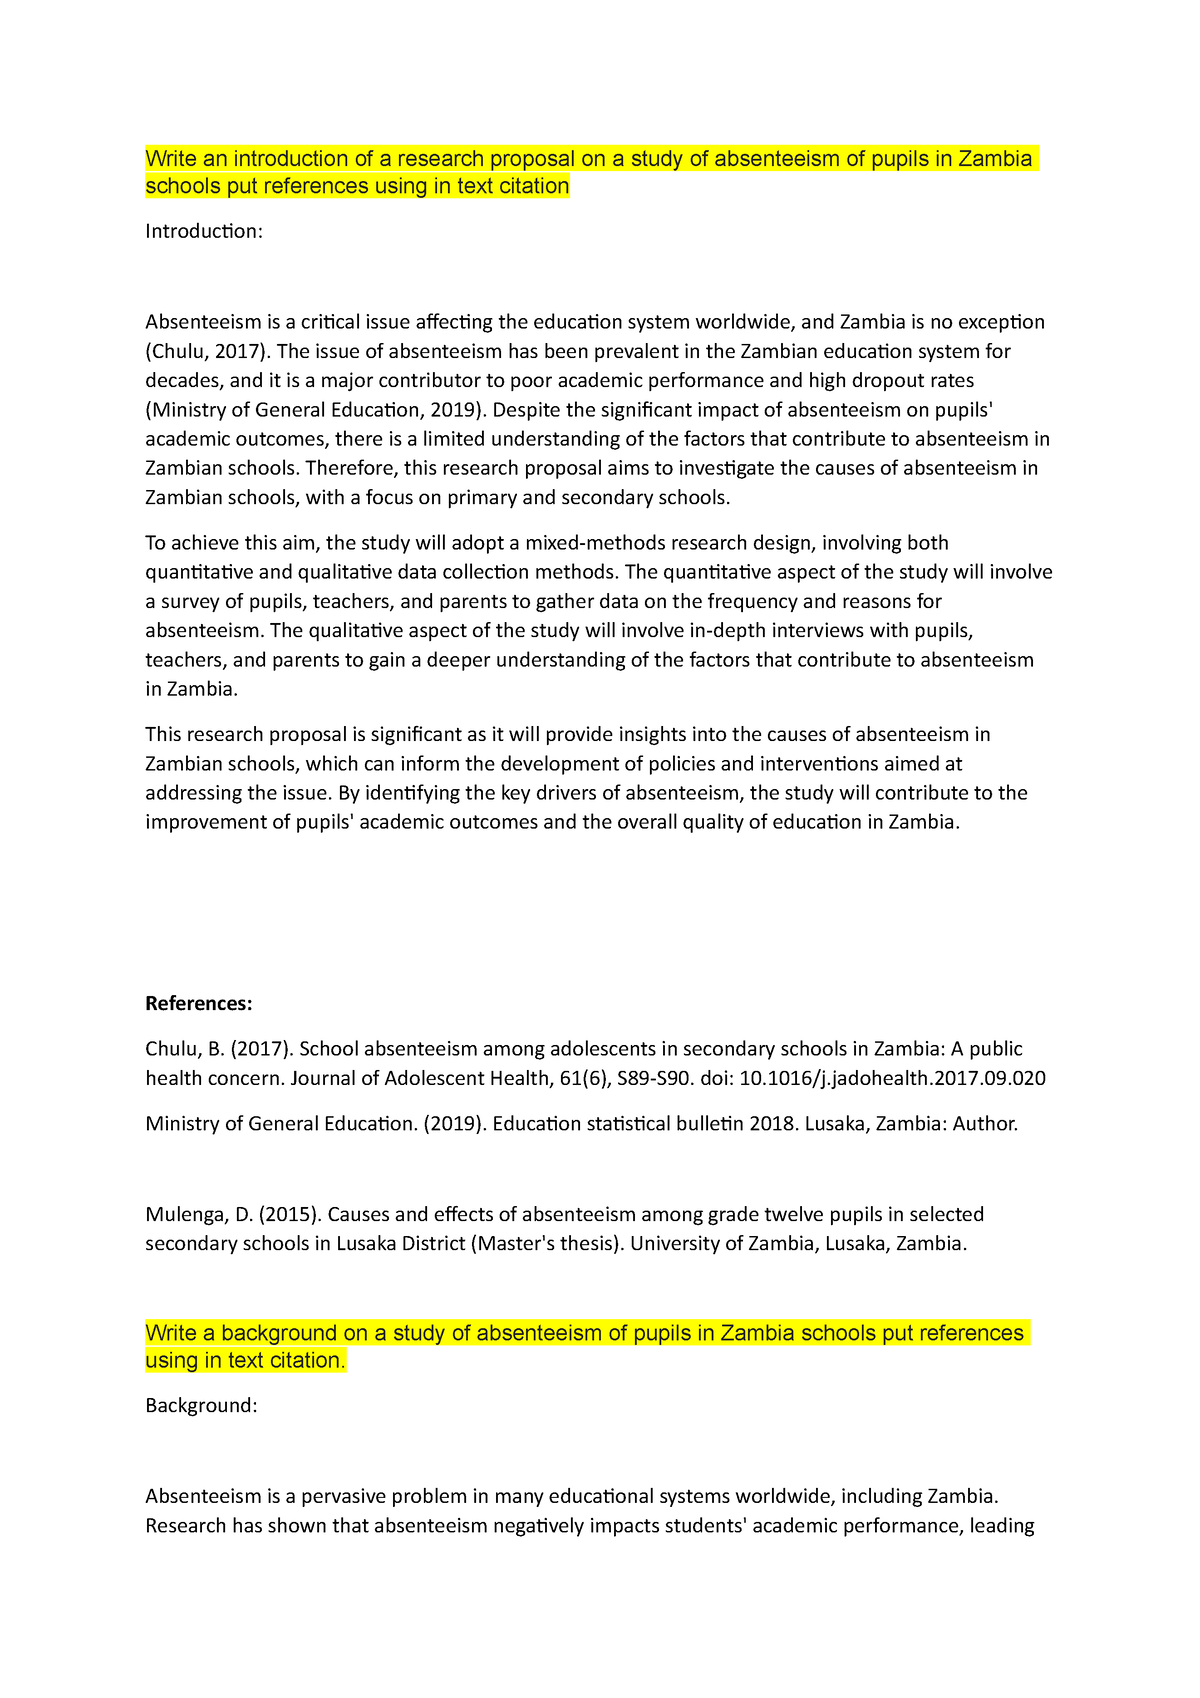 sample of research proposal on absenteeism